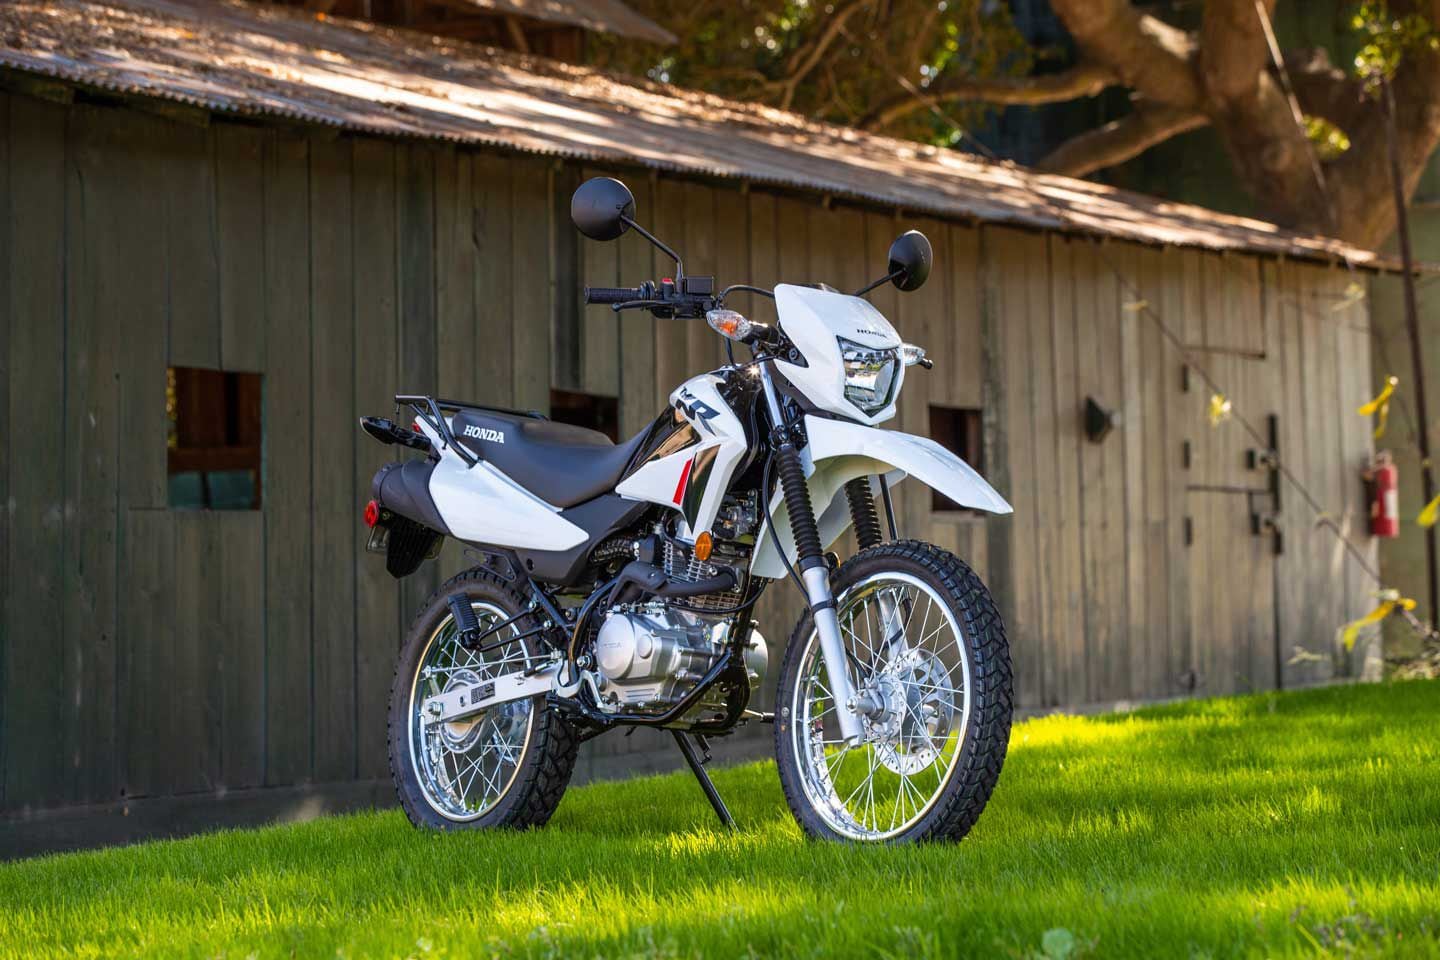 The Honda XR150L offers 9.6 inches of ground clearance.